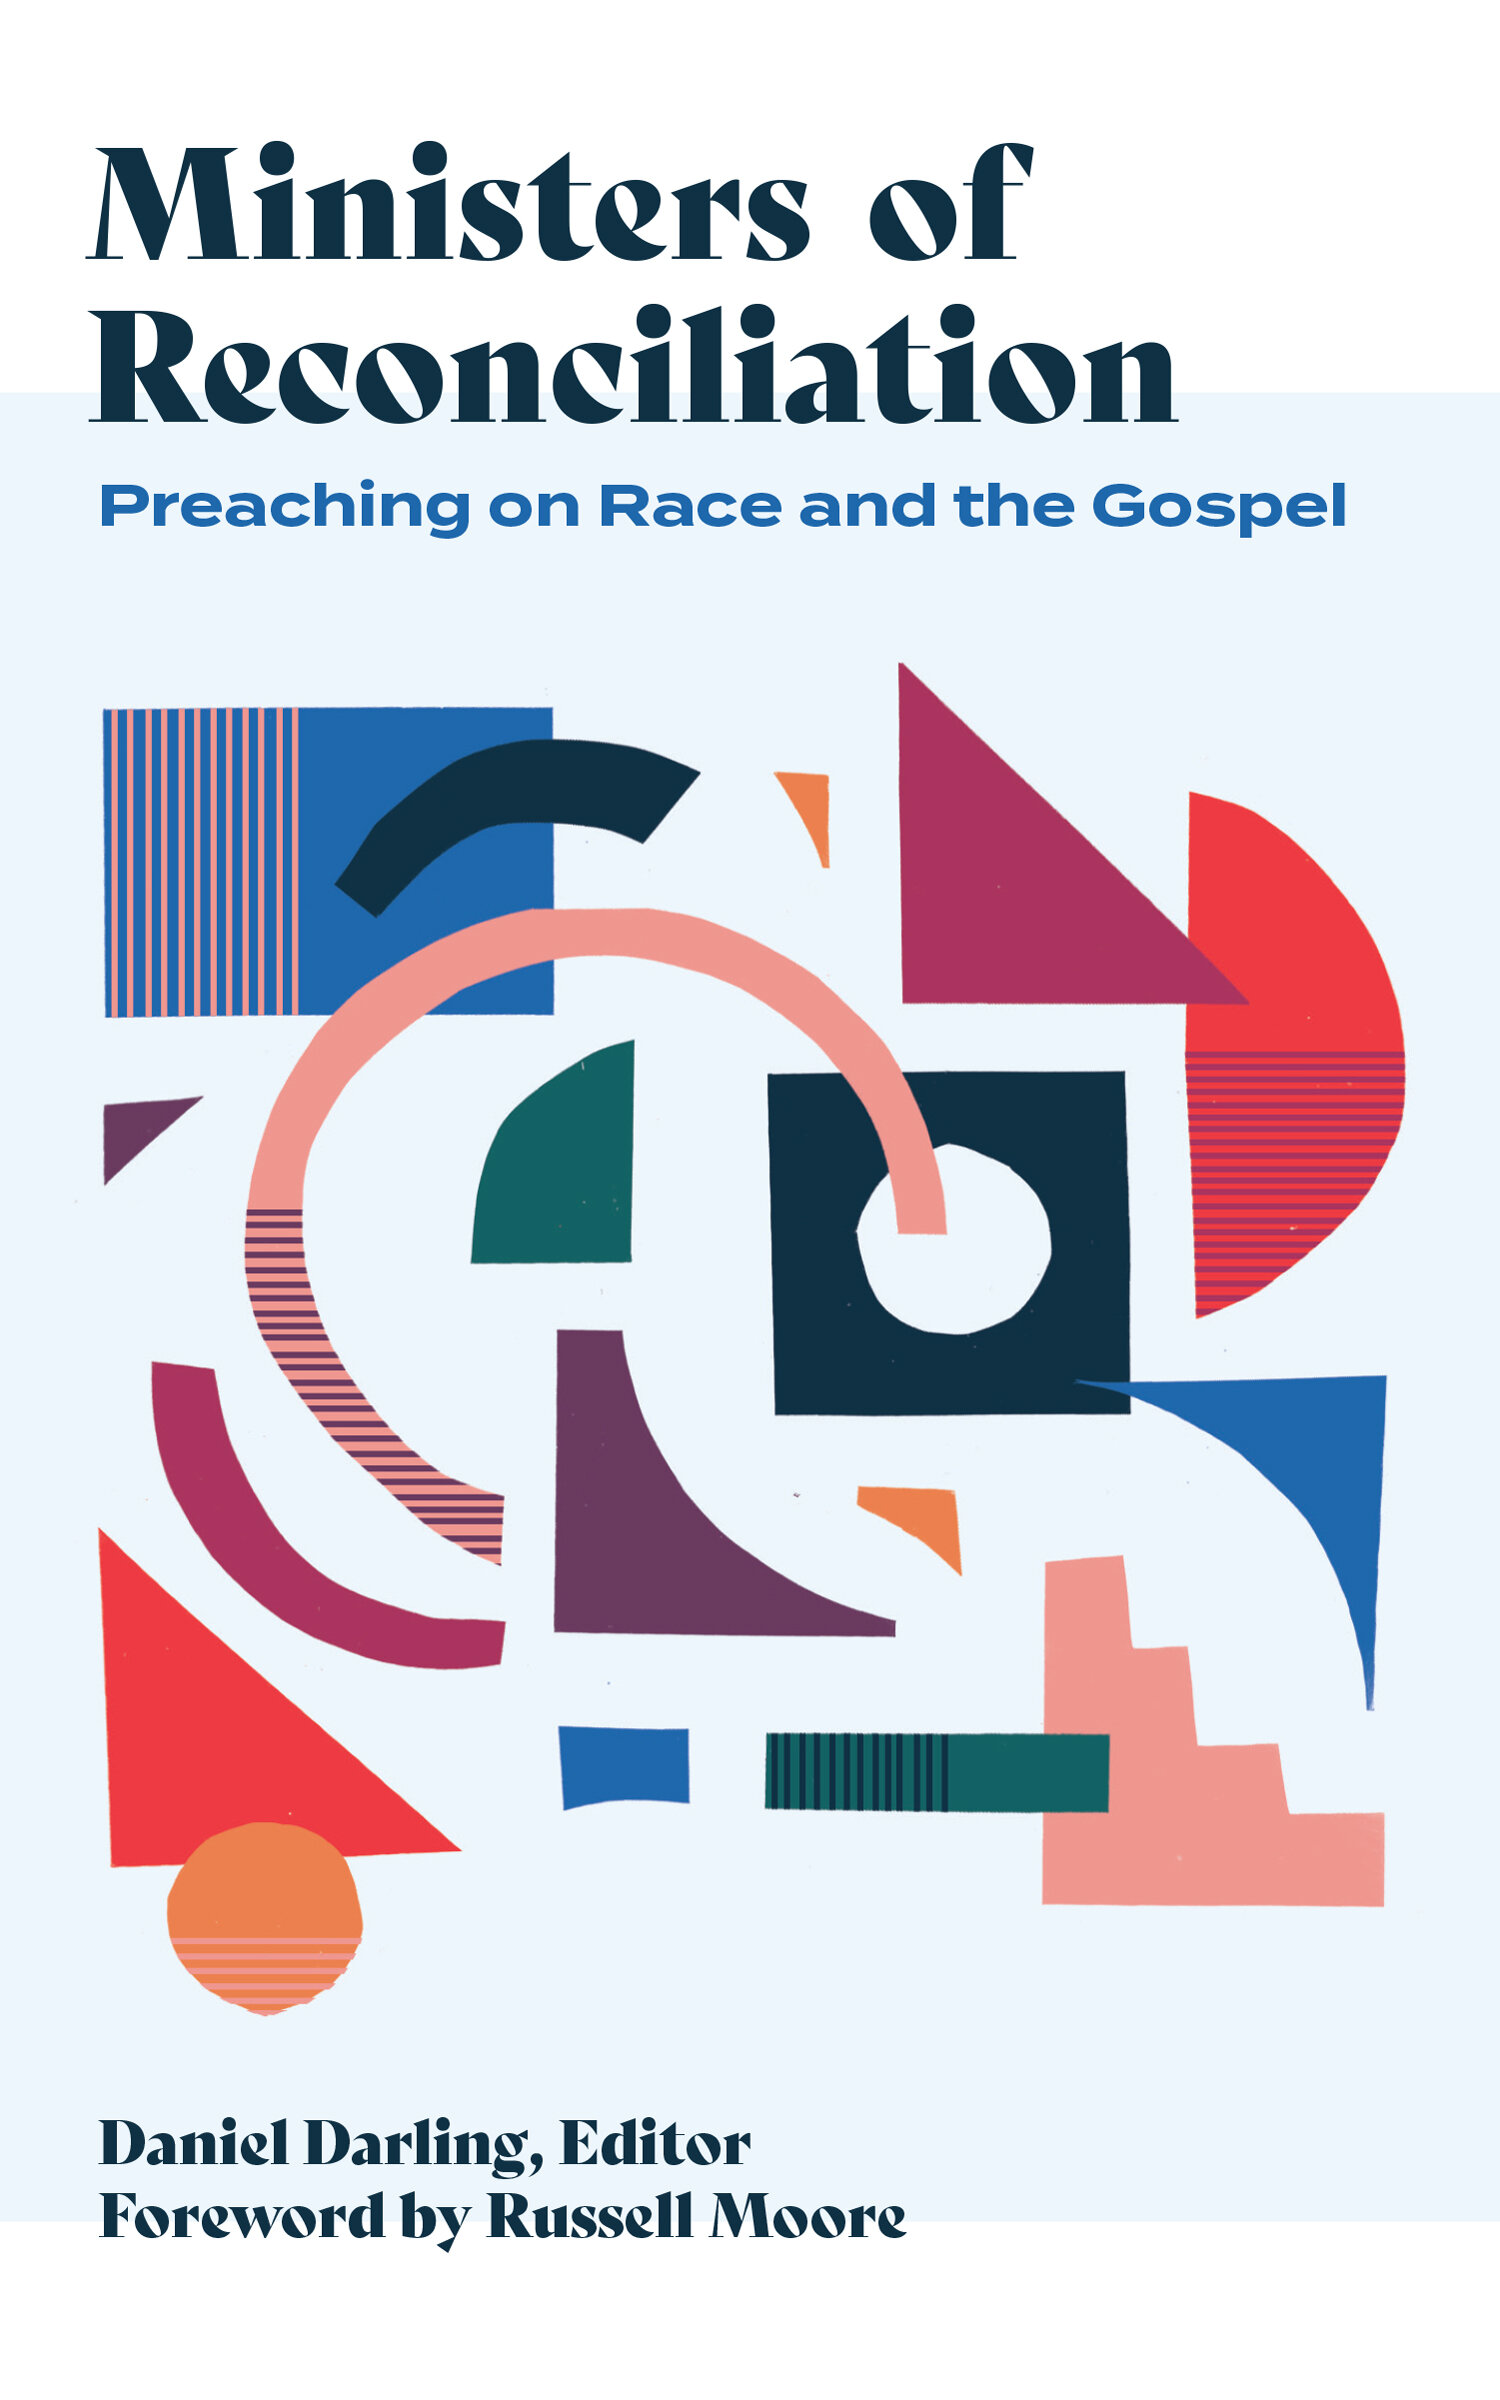 Masters of Reconciliation: Preaching on Race and the Gospel book cover